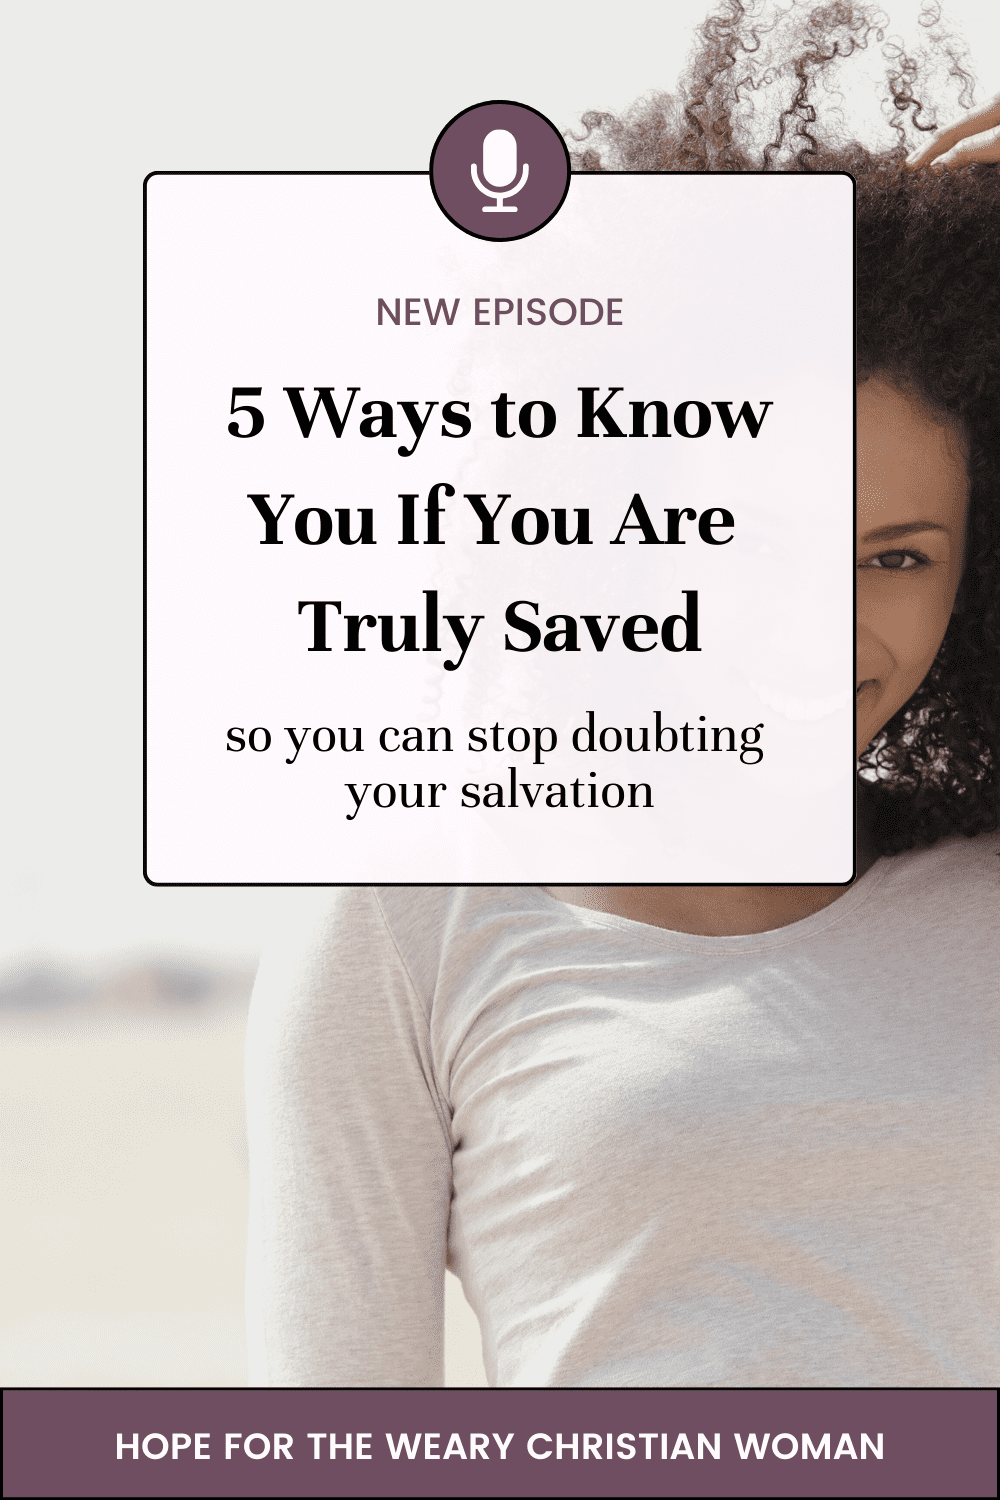 Are you tired of wondering if you are truly saved? Learn 5 ways to stop doubting your salvation and find assurance of your faith - without having to worry about falling out of favor with God when you make a mistake. Plus, tips about how to know if you are growing closer to God and stronger in your faith.